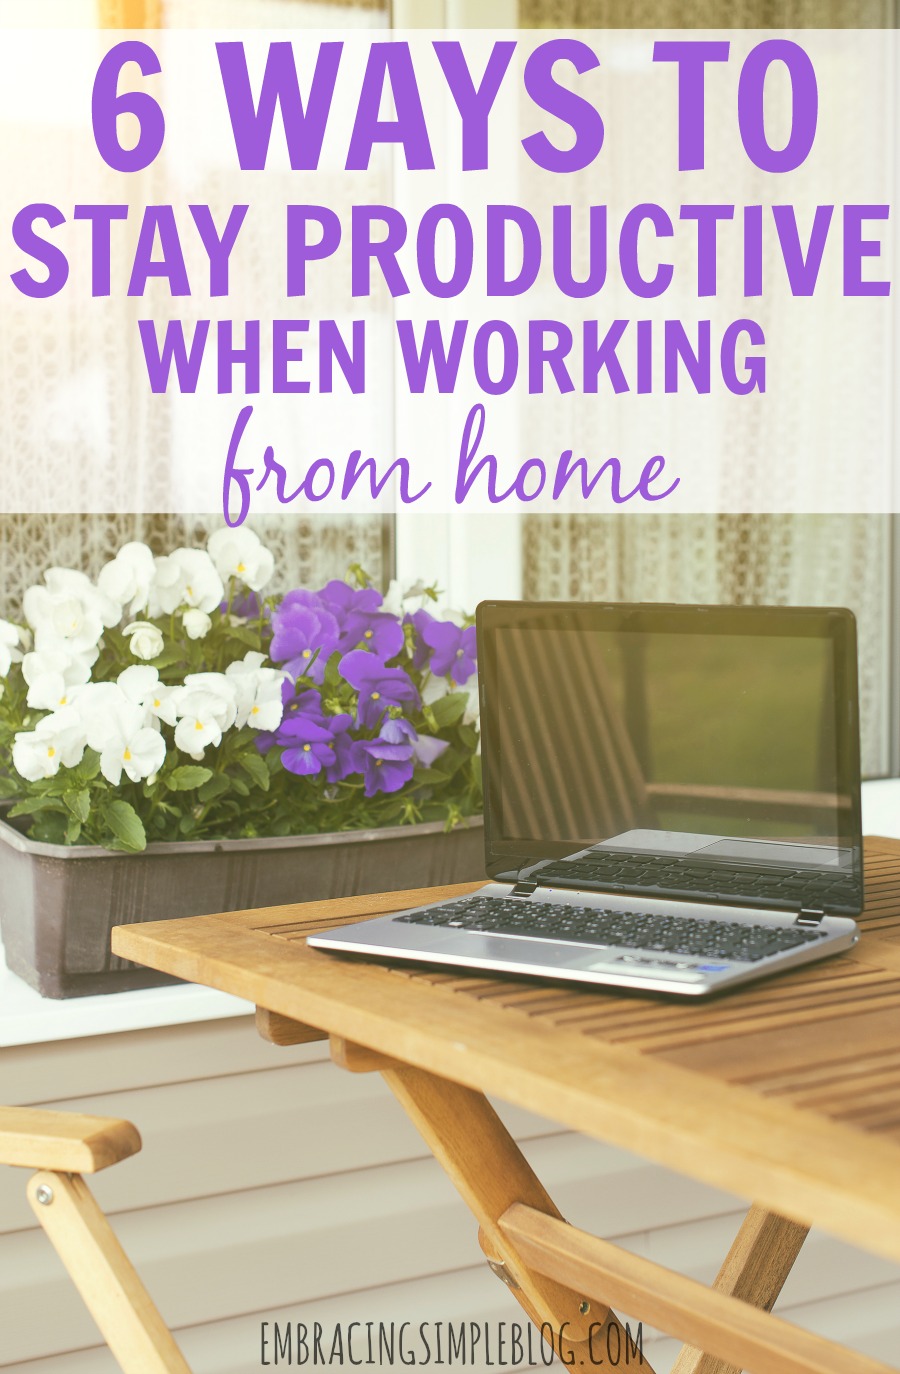 Do you struggle with being productive when you work from home? Read these fabulous tips on 6 ways to stay productive when working from home that will help you to be more productive, so you can work smarter, not harder.